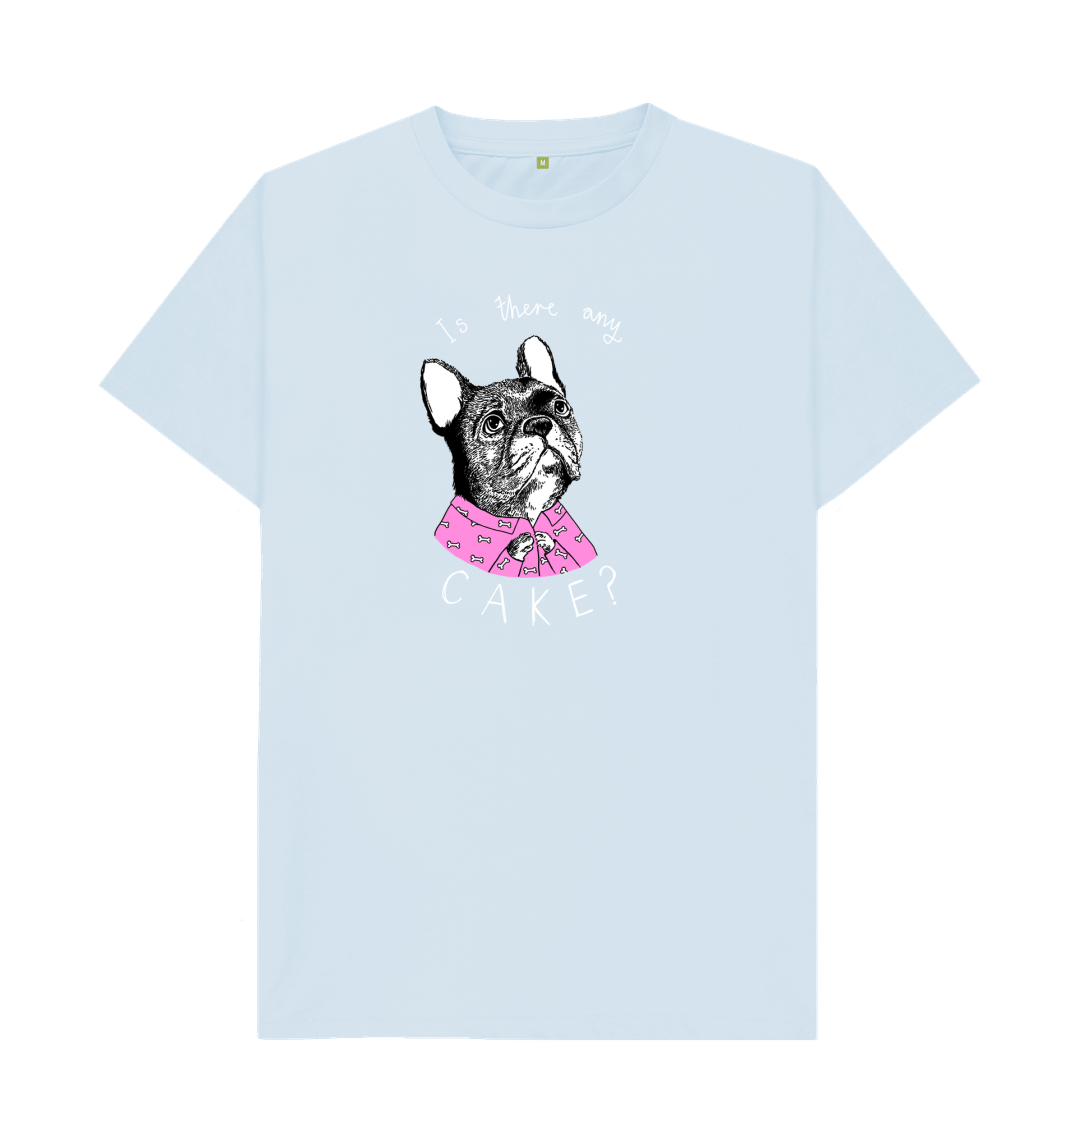 Sky Blue 'Is There Any Cake?' Men's T-shirt